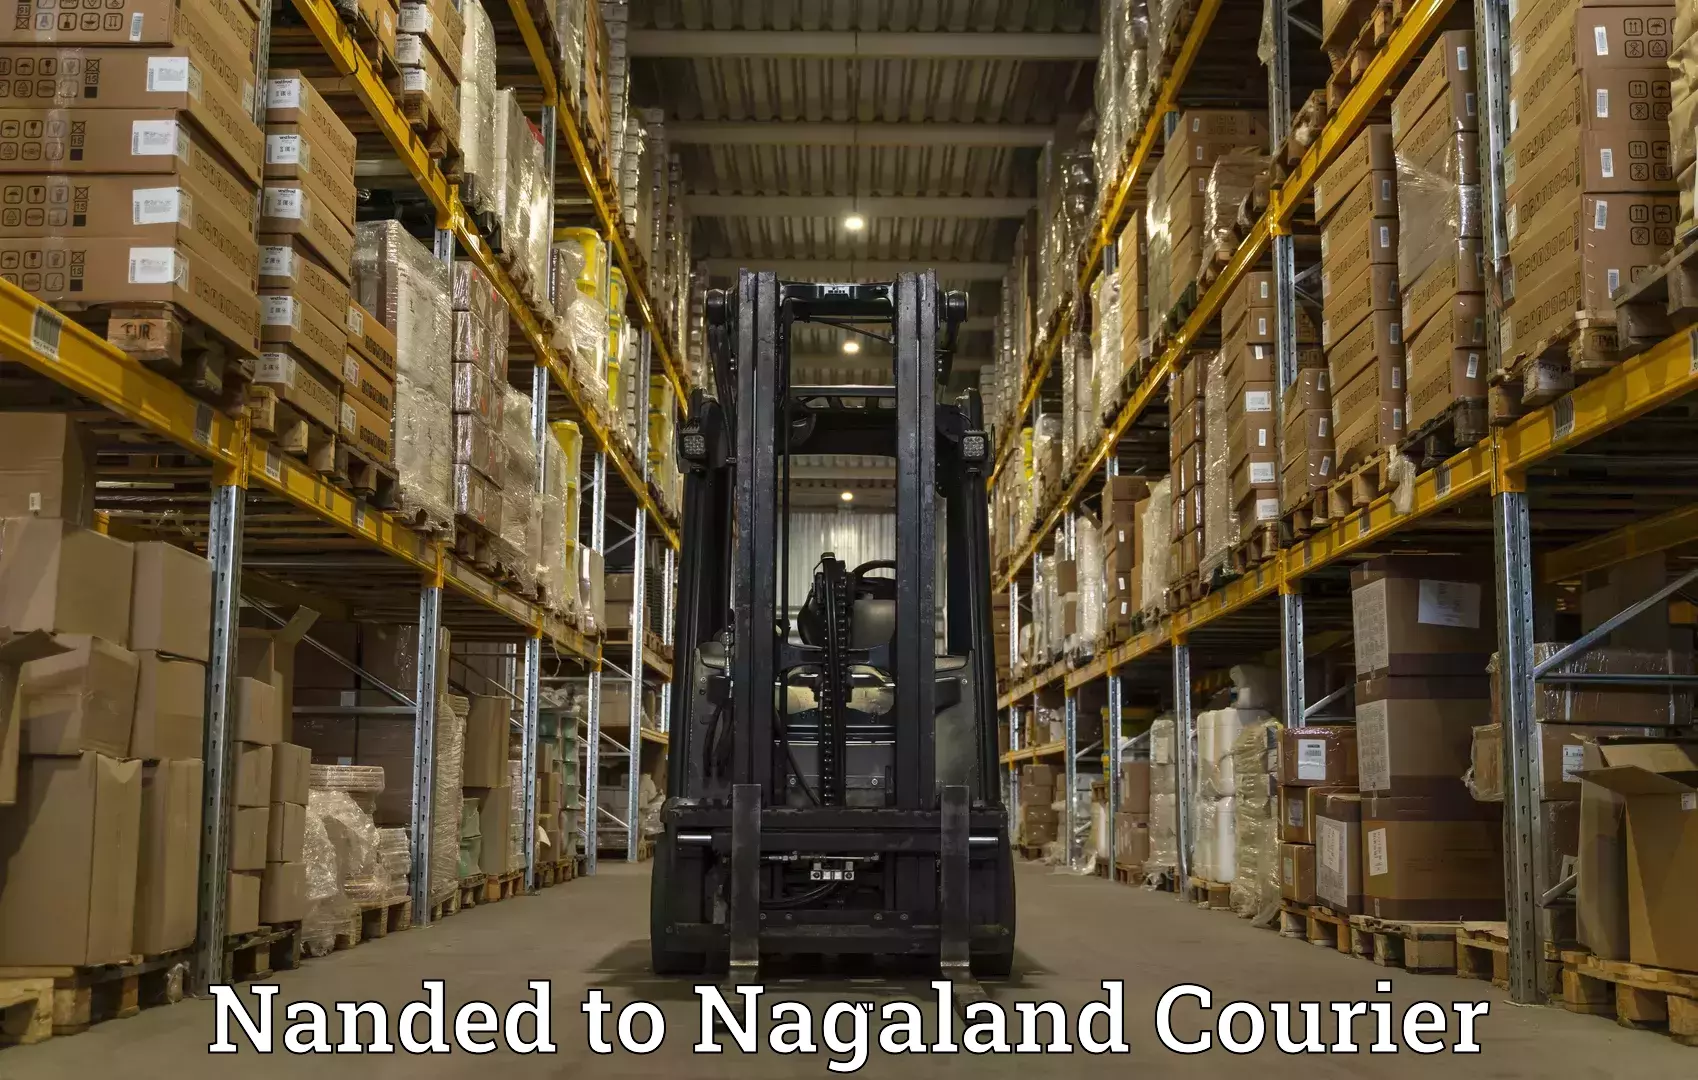 State-of-the-art courier technology Nanded to Chumukedima